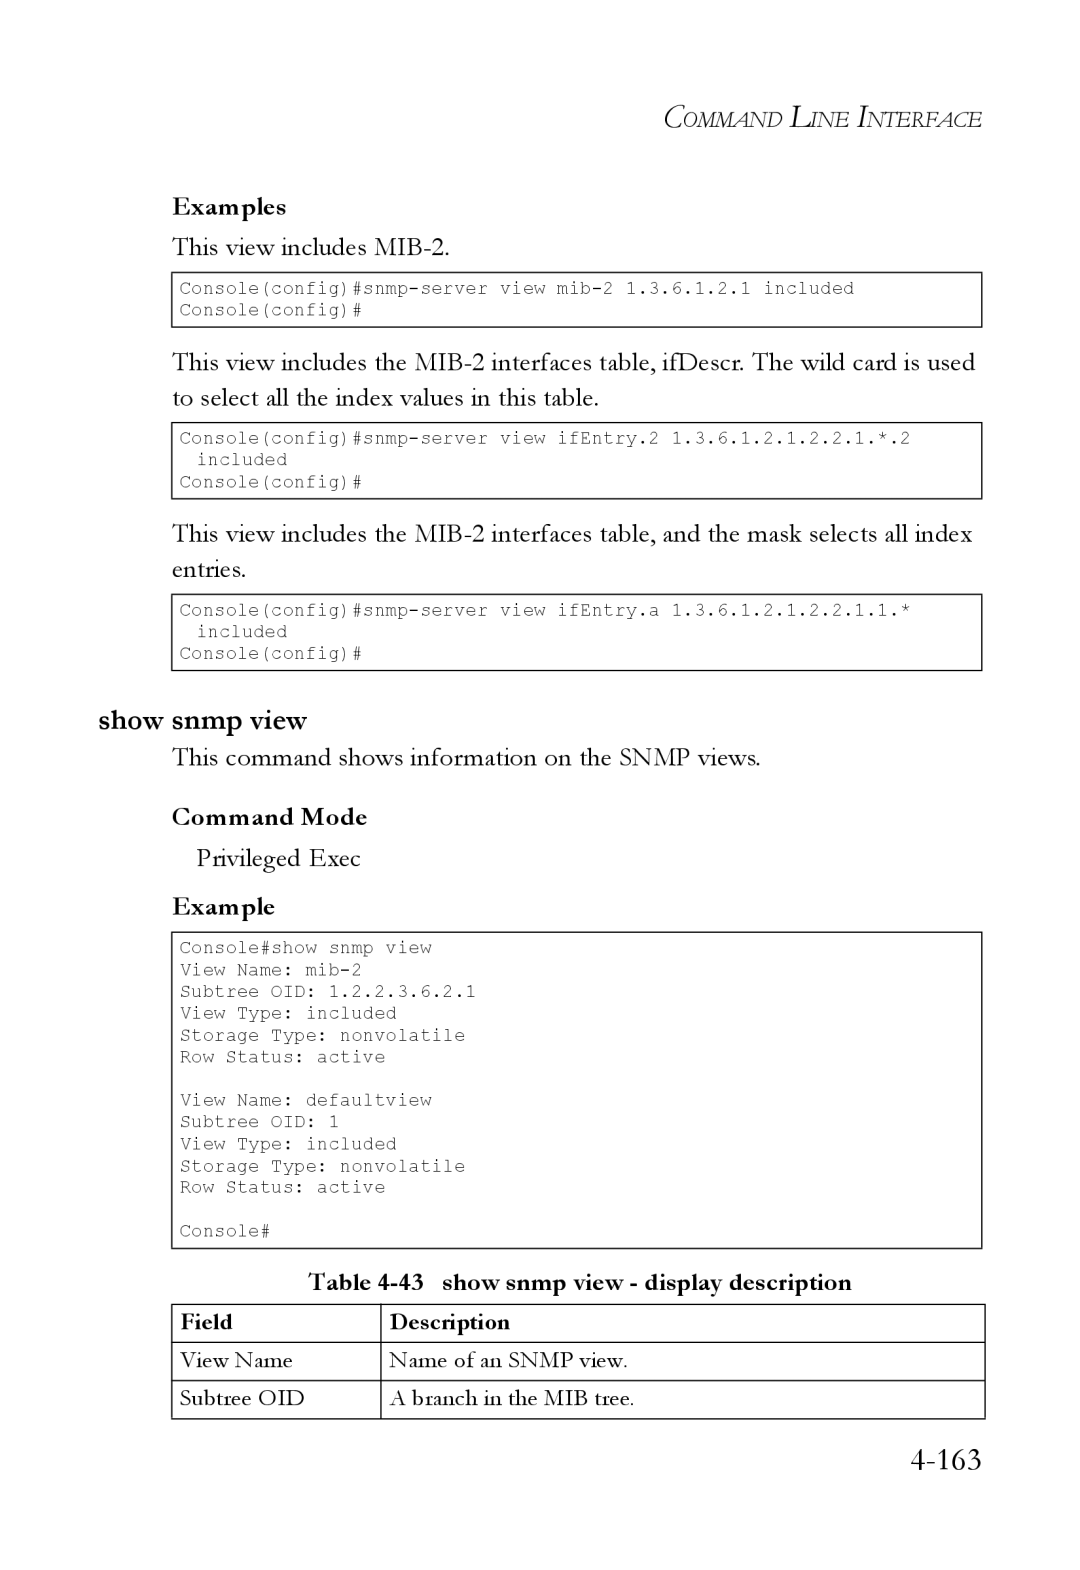 SMC Networks SMC6824M Show snmp view, Examples, This view includes MIB-2, This command shows information on the Snmp views 